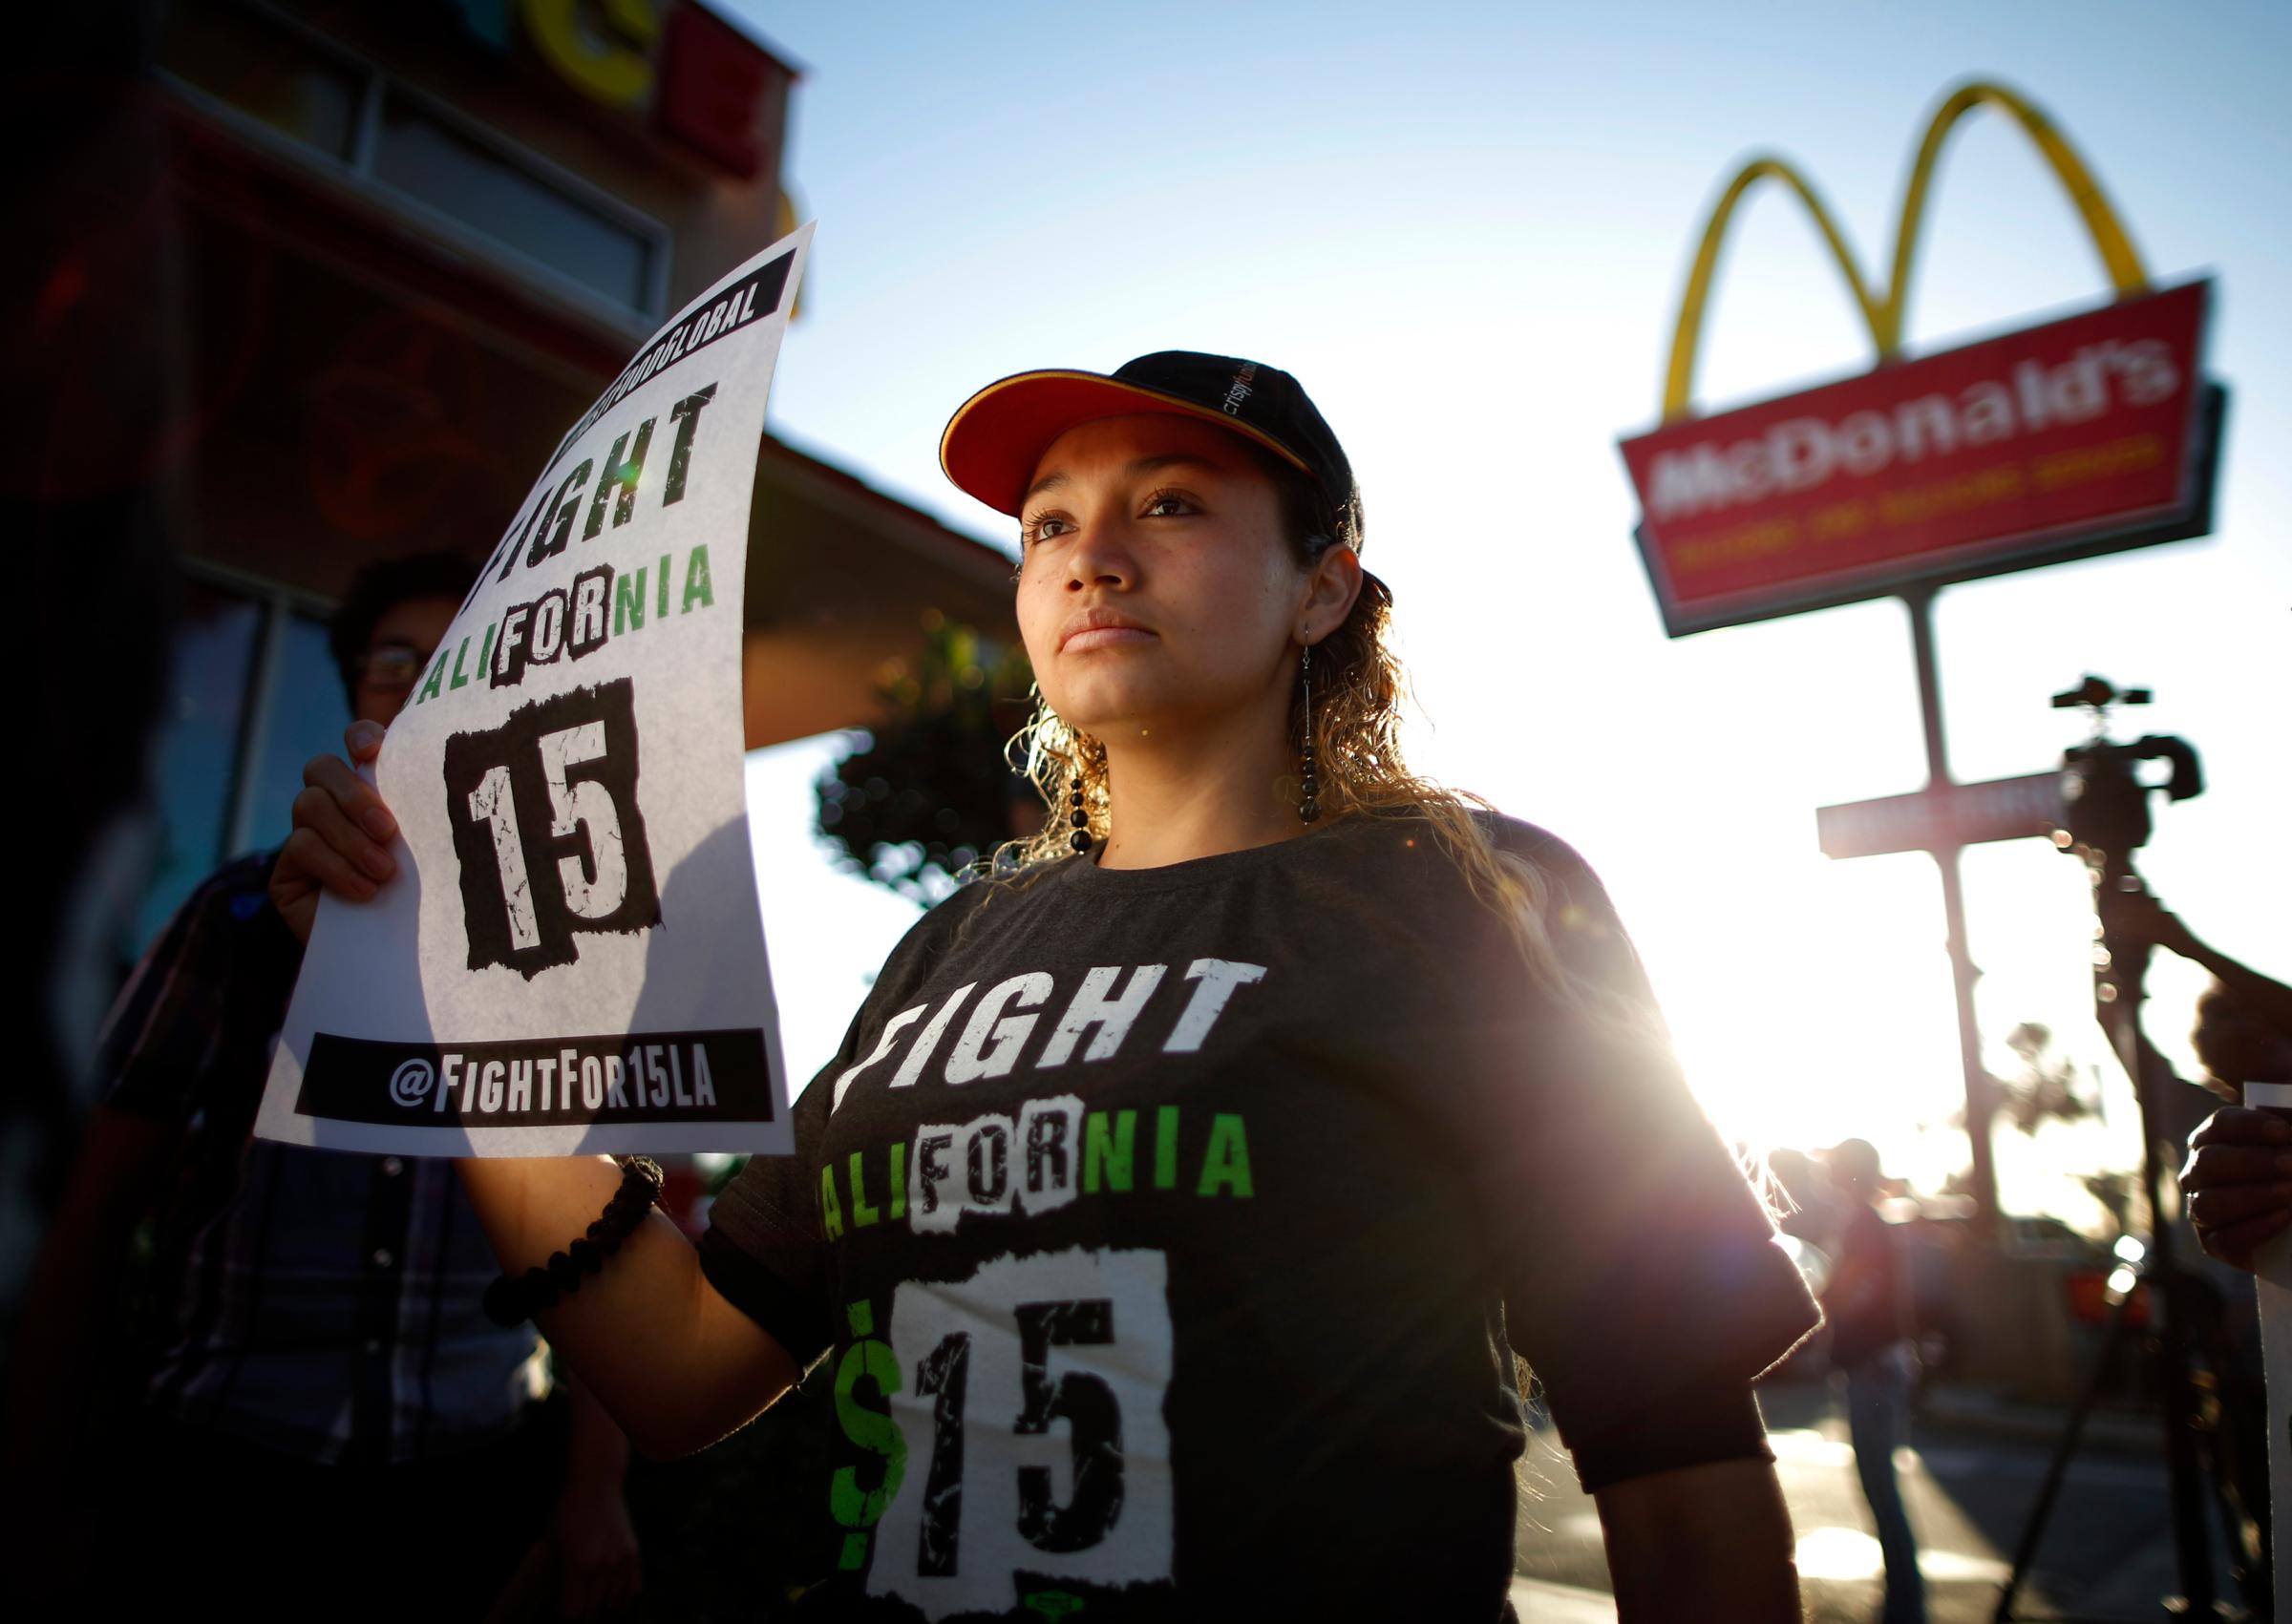 Demonstrators take part in a protest to demand higher wages for fast-food workers outside McDonald's in Los Angeles, on May 15, 2014.